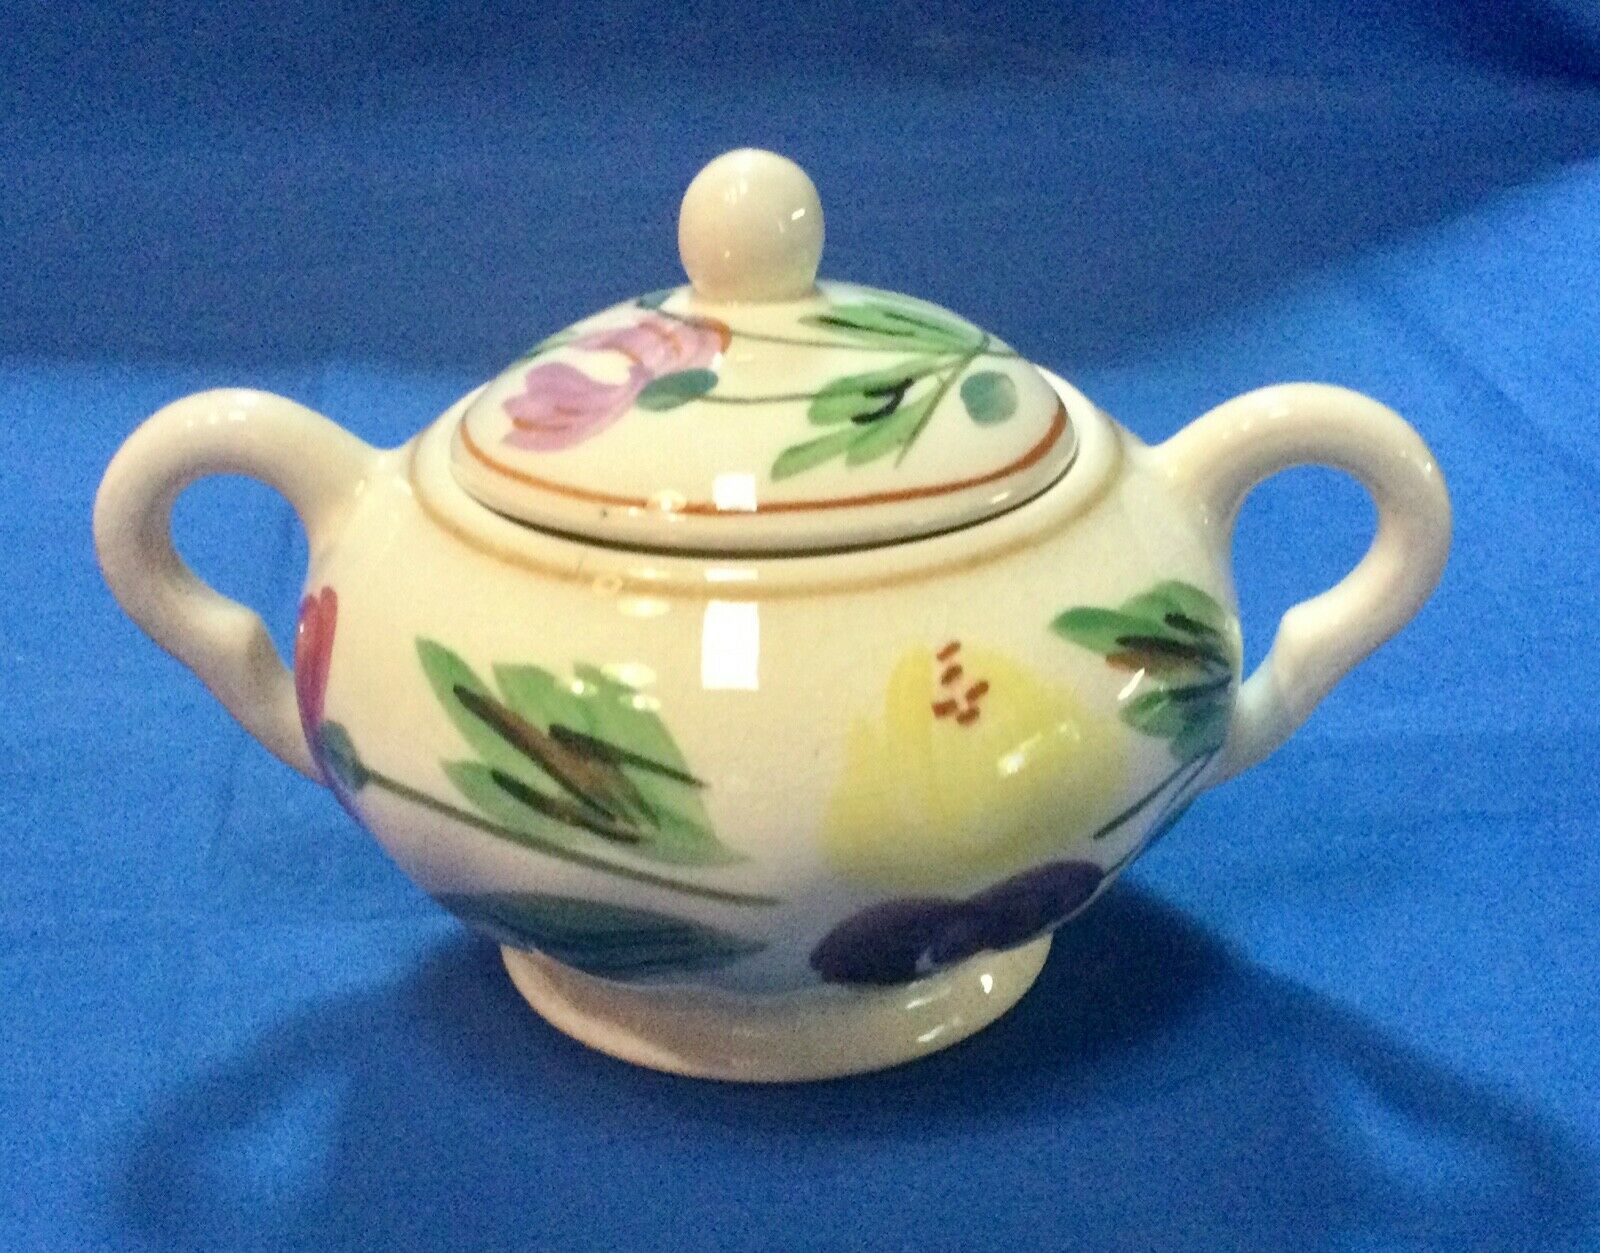 **blue Ridge Pottery "sunday's Best" Sugar With Lid**